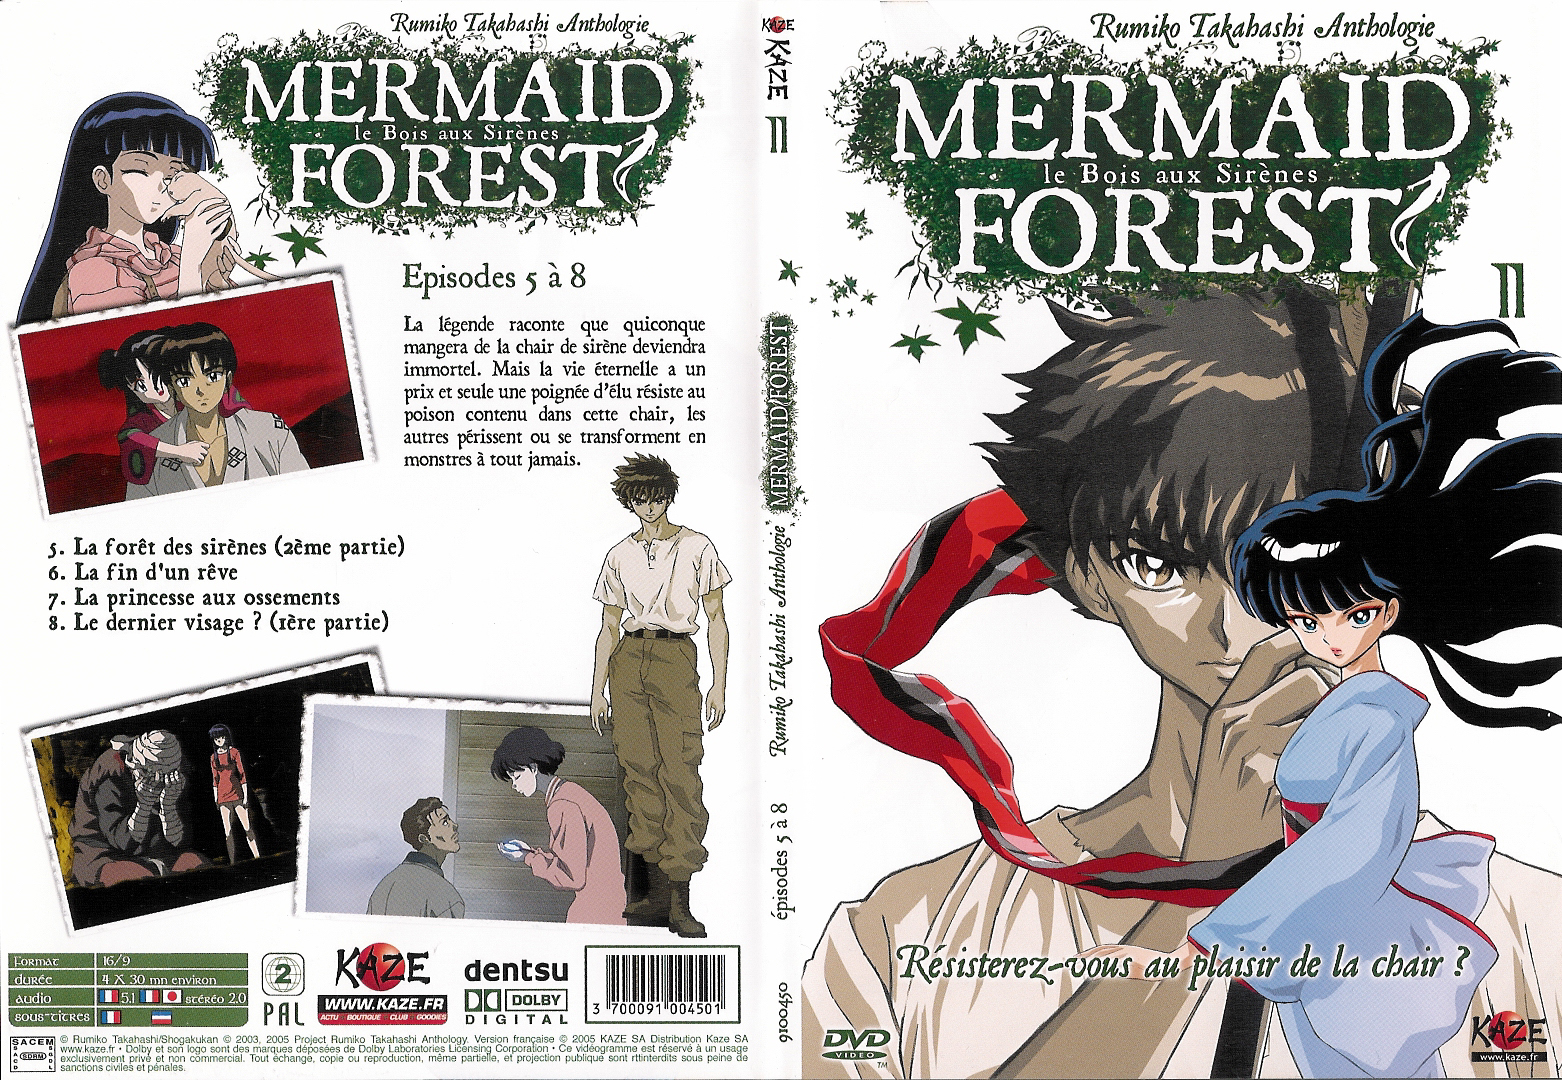 Jaquette DVD Mermaid Forest vol 02